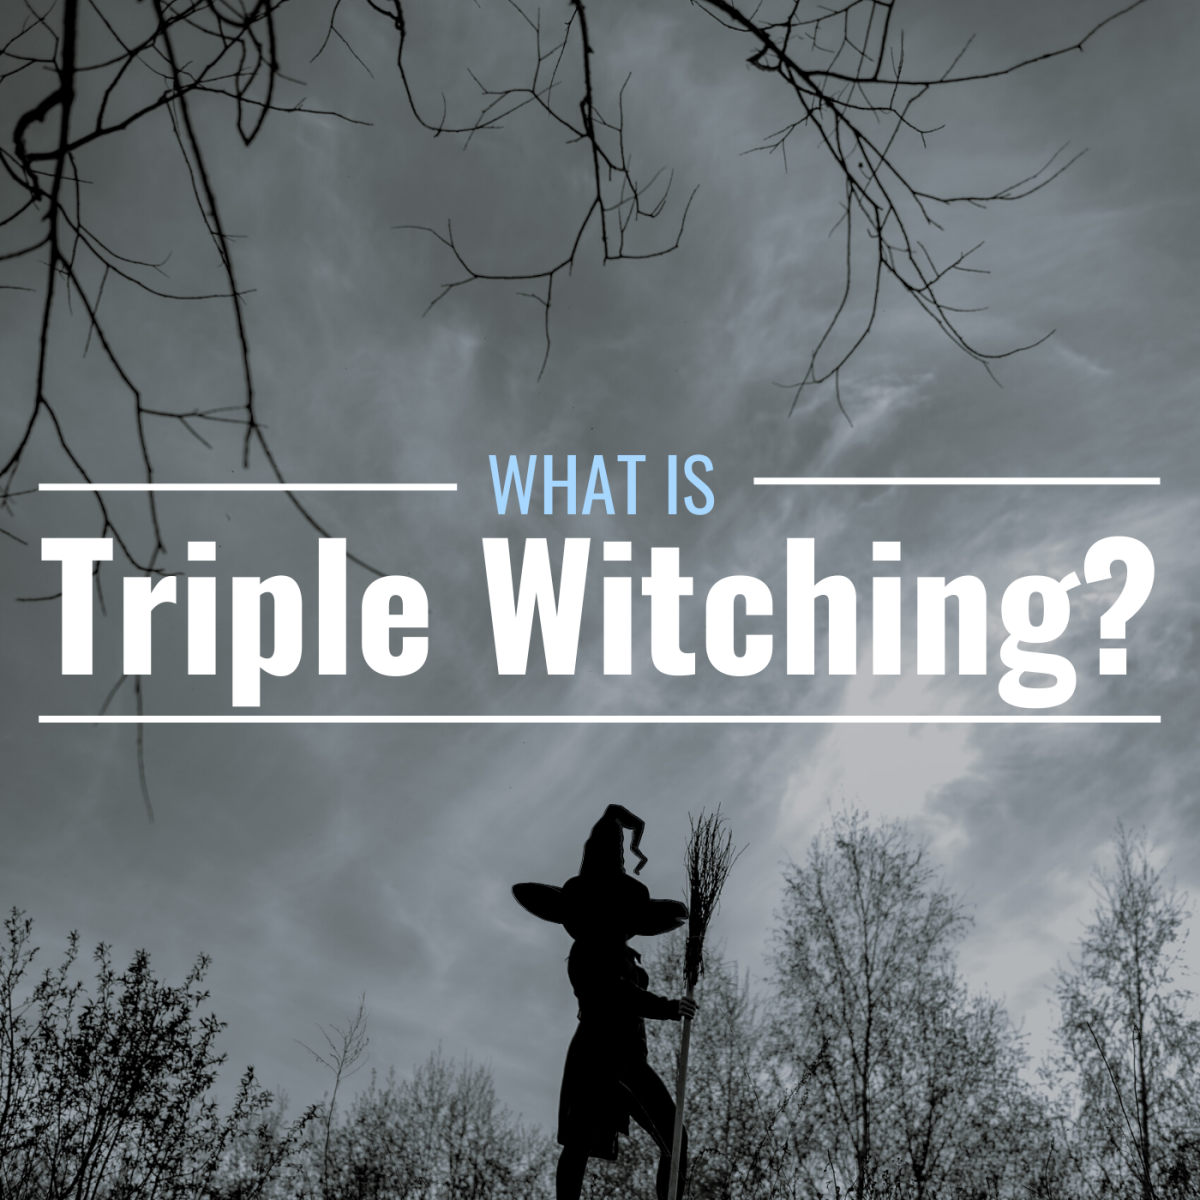 The text reads "What Is Triple Witching?" The background image depicts a moody evening in a clearing in the woods, a shadowy figure stands wearing a pointy hat and carrying a broomstick